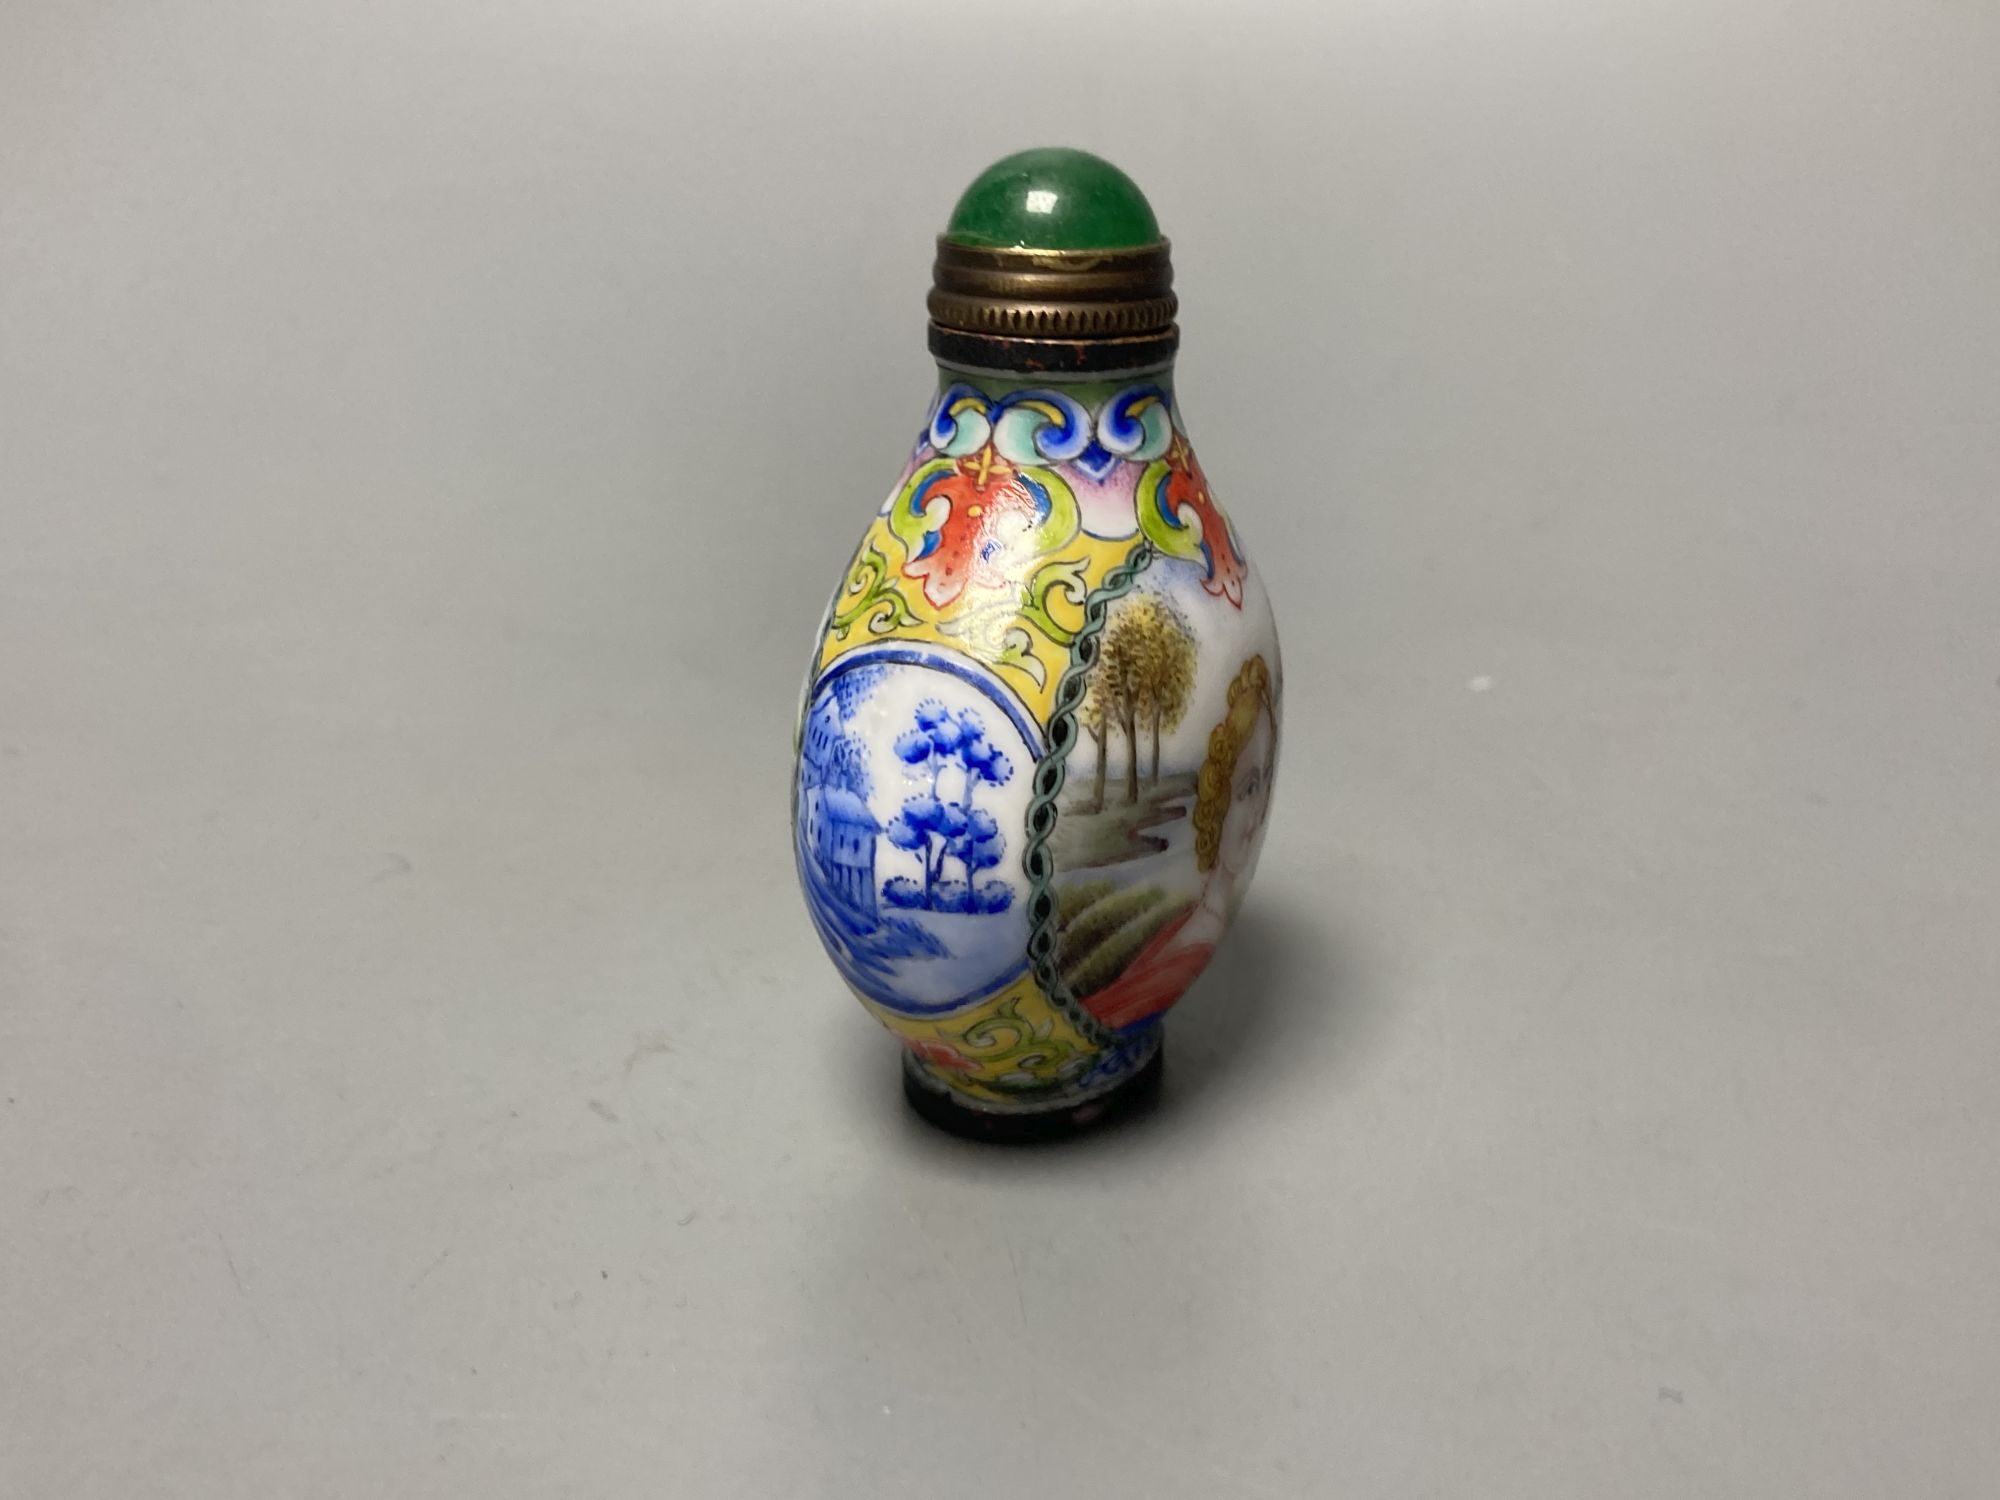 A Chinese enamel on copper snuff bottle, height 6.5cm